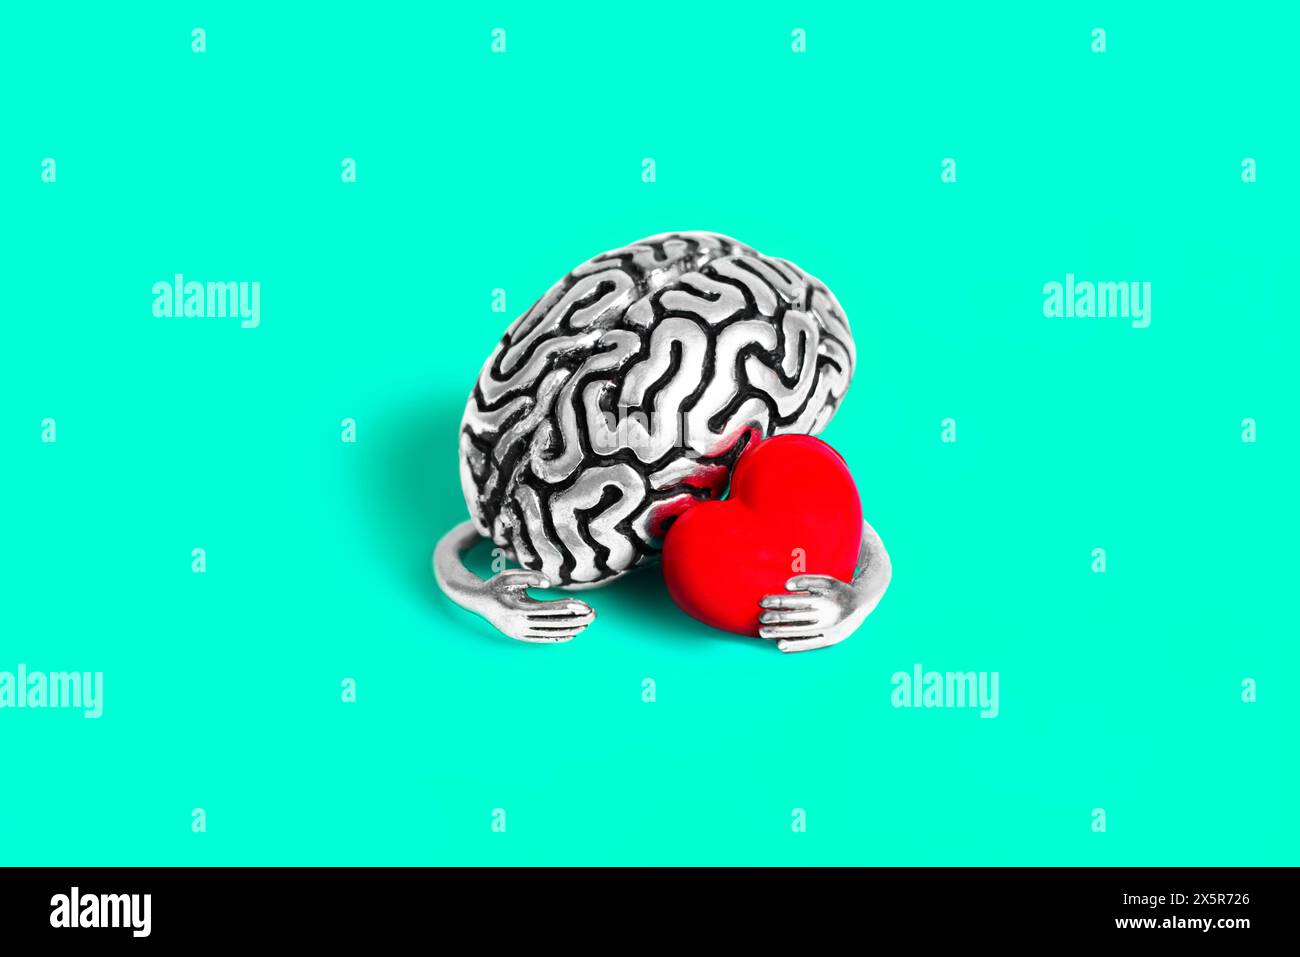 Anatomical model of a human brain with cute hands made of steel gently holds a red heart isolated on teal background. Creative mind and feelings relat Stock Photo